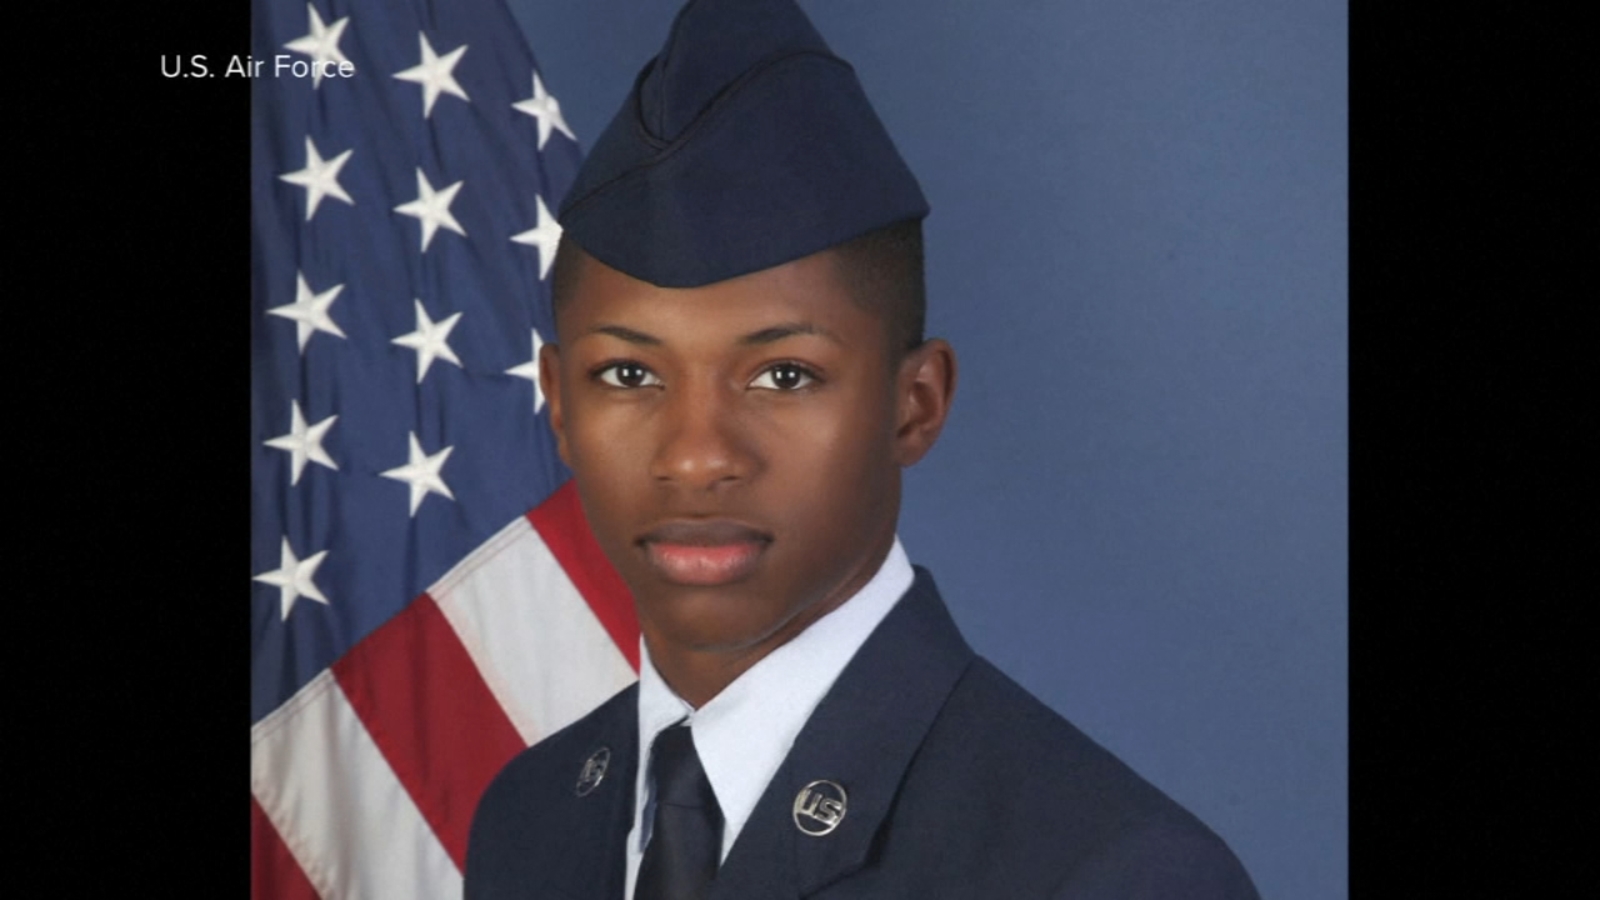 Gun alone doesn’t justify deadly force in fatal Florida police shooting of US Air Force Senior Airman Roger Fortson, experts say [Video]